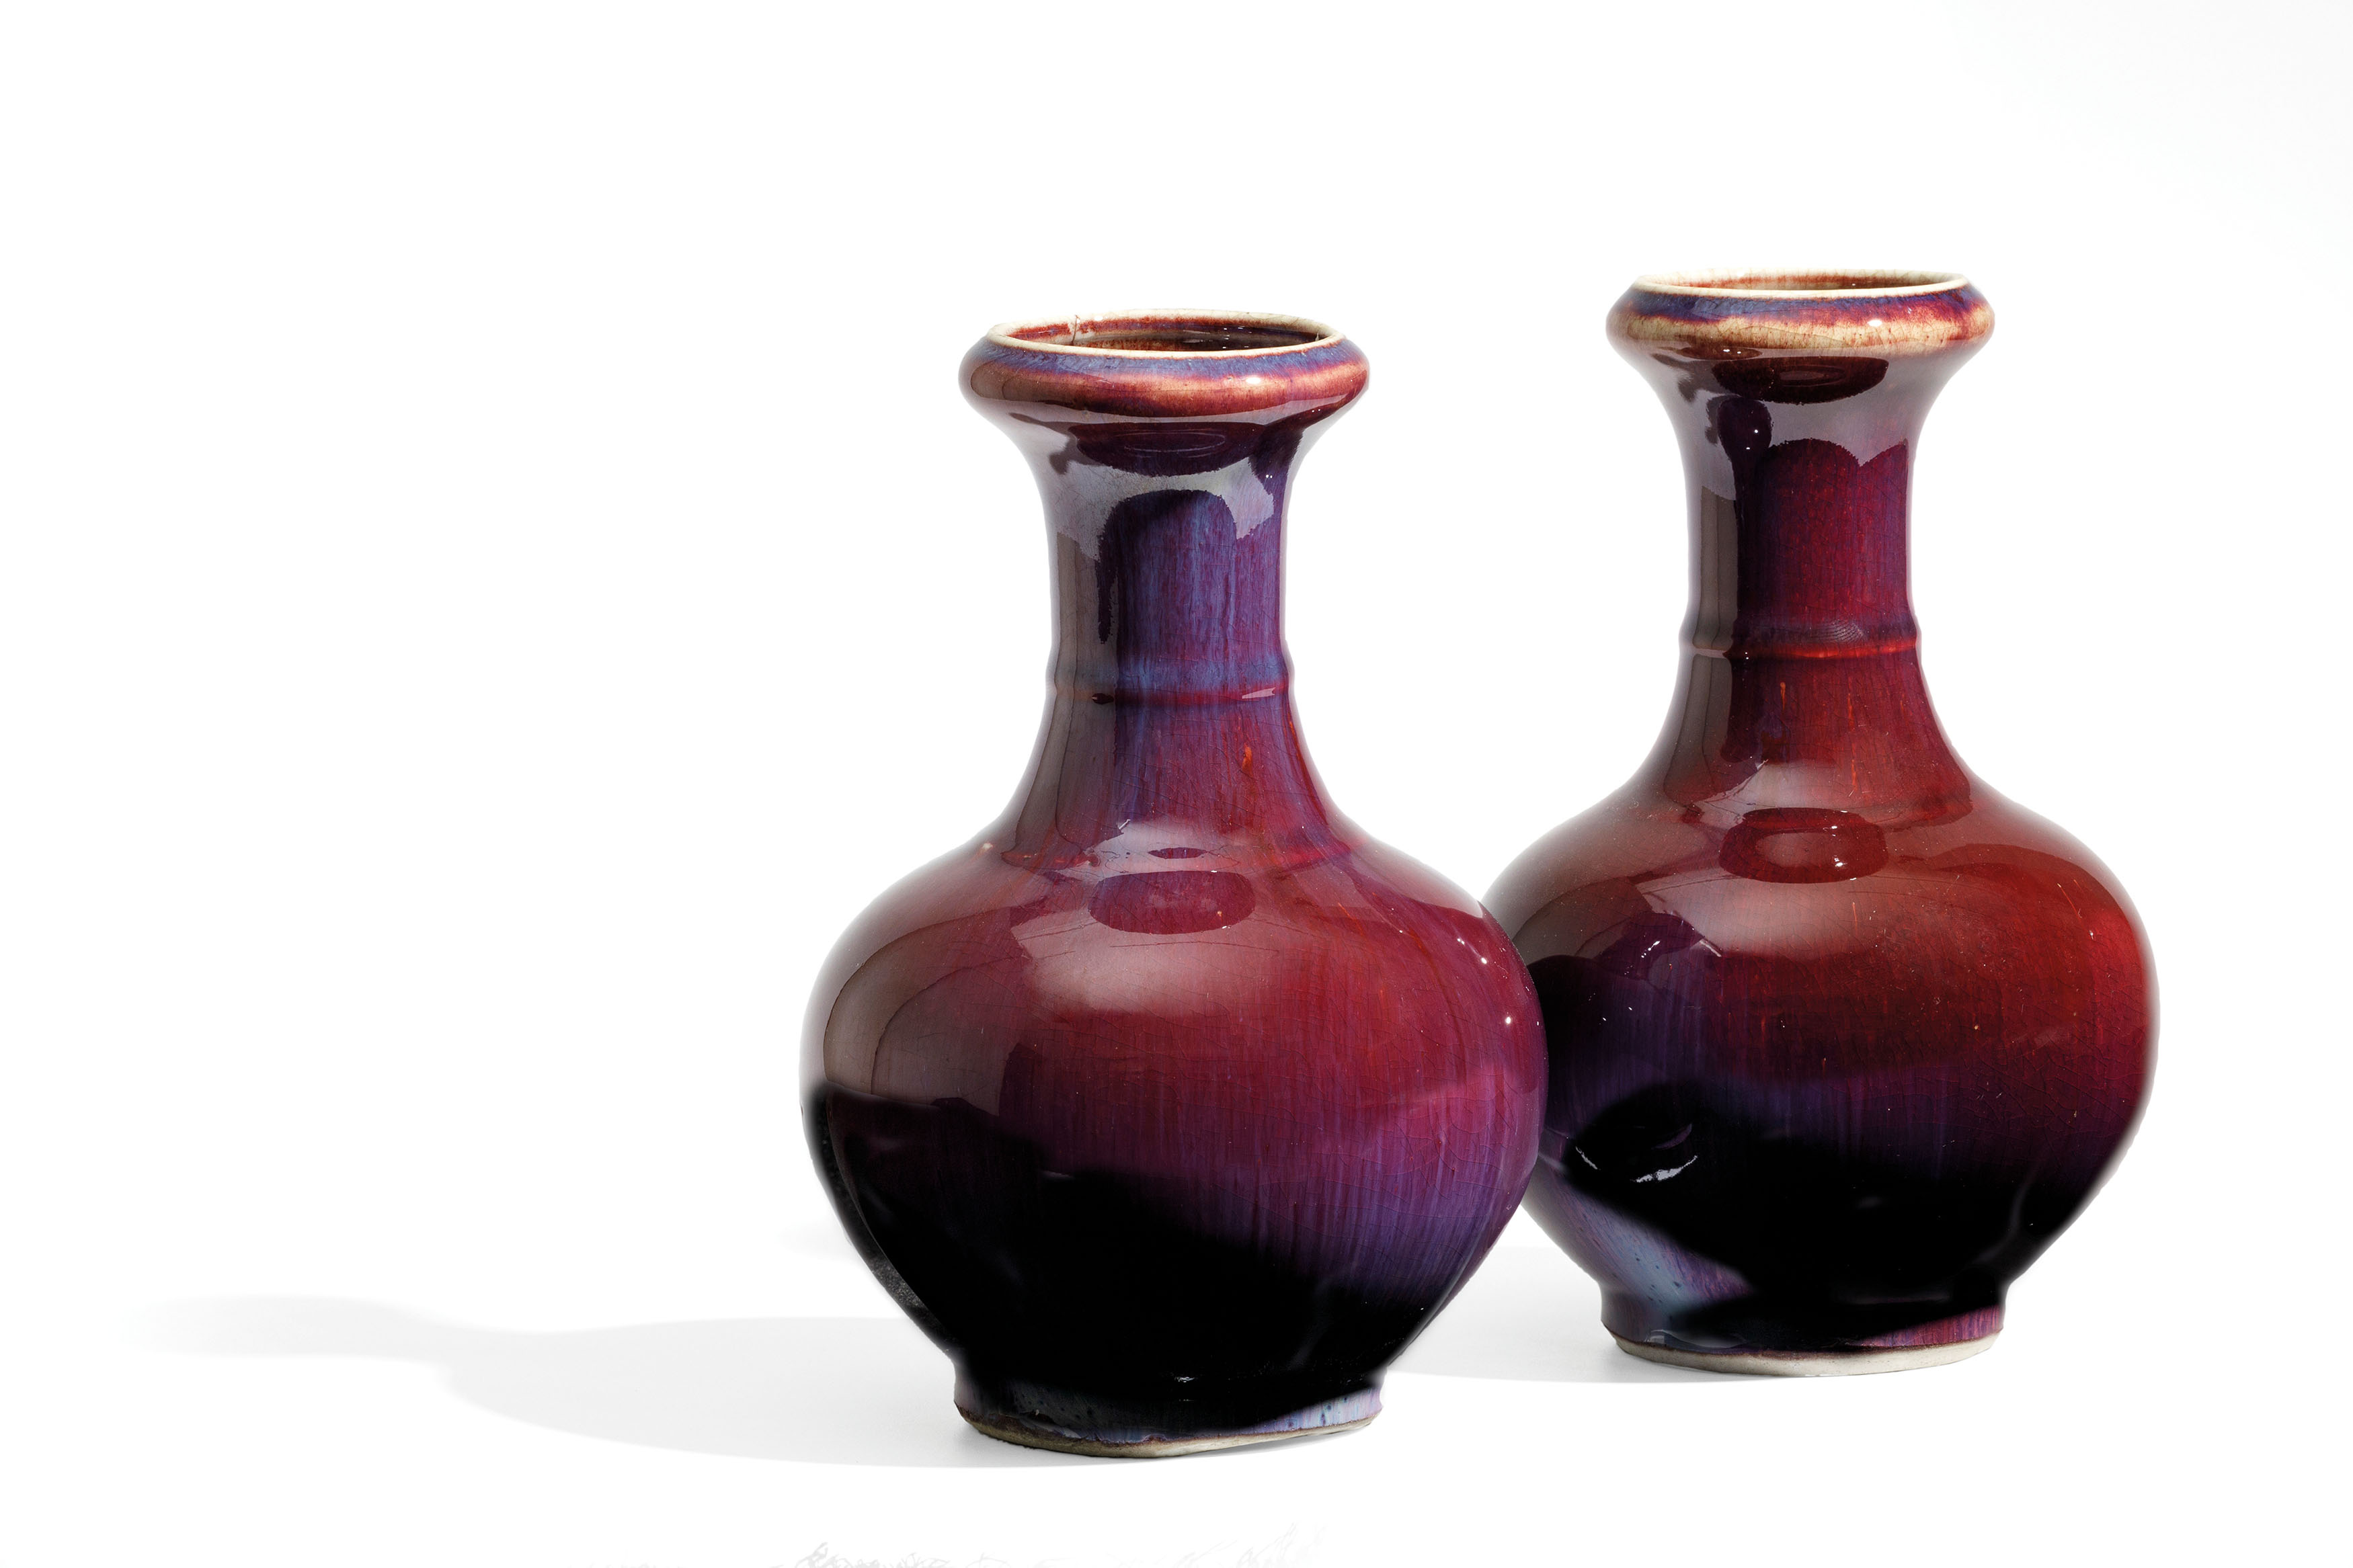 A PAIR OF SMALL FLAMBÉ-GLAZED BOTTLE VASES, CHINA, 19TH CENTURY (2)